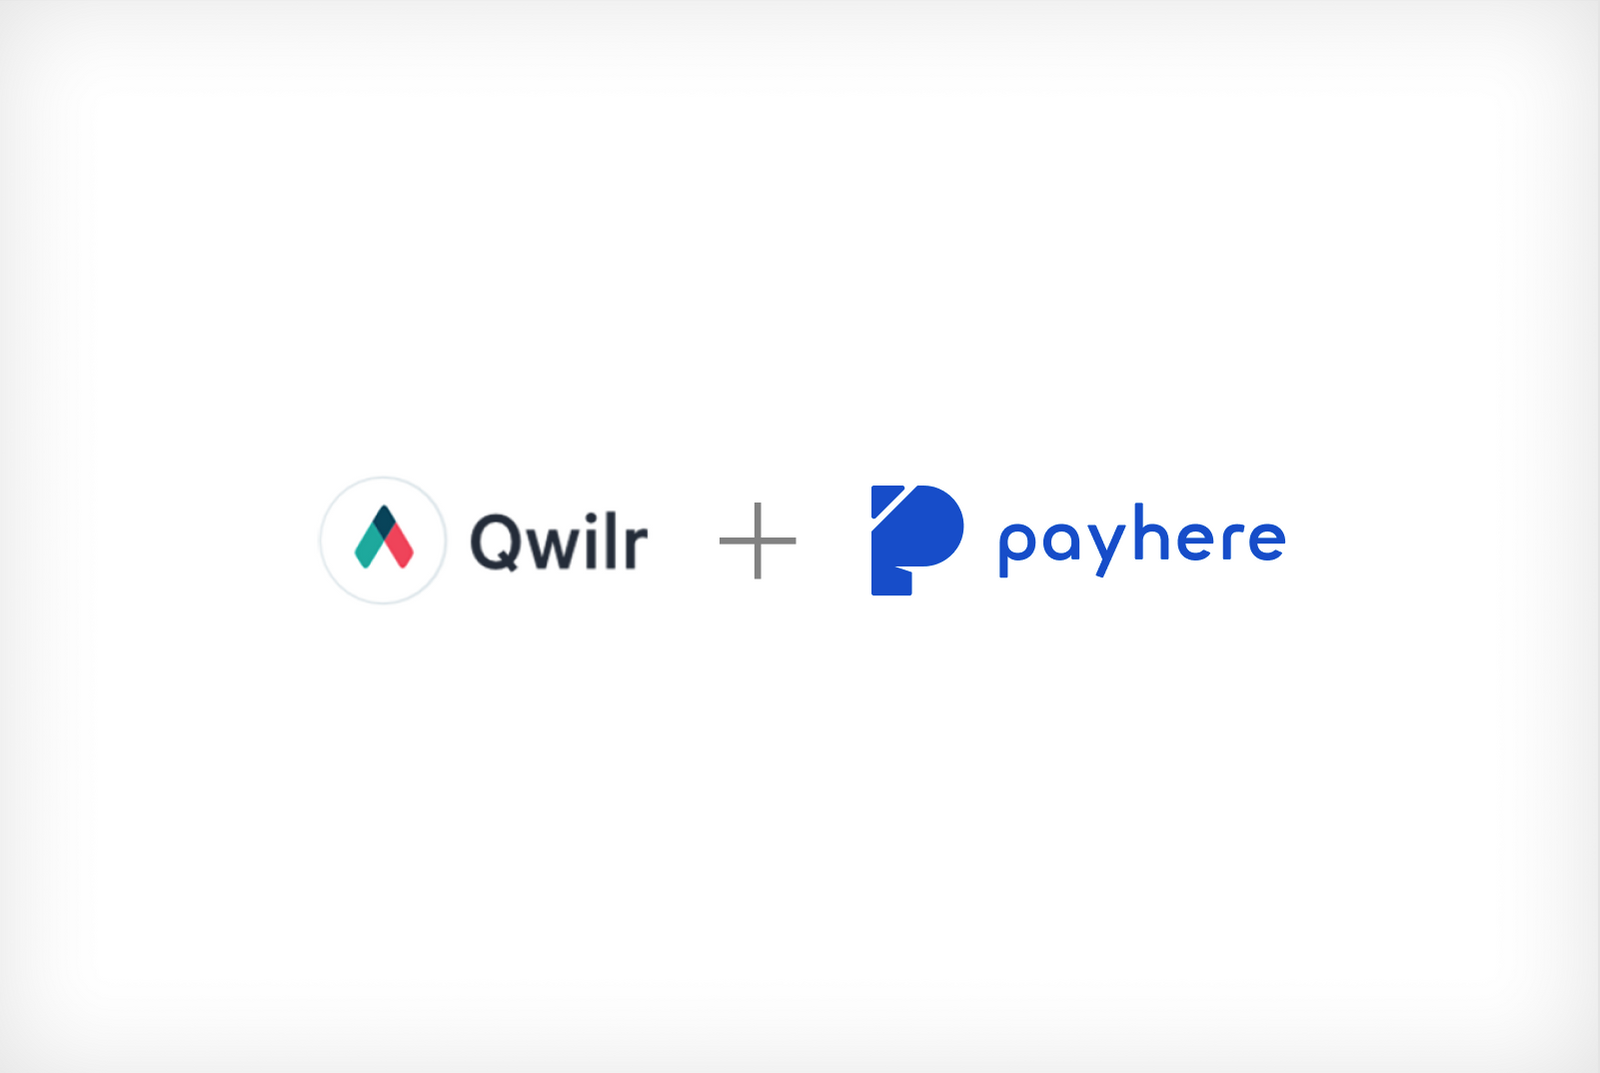 Using payhere with Qwilr